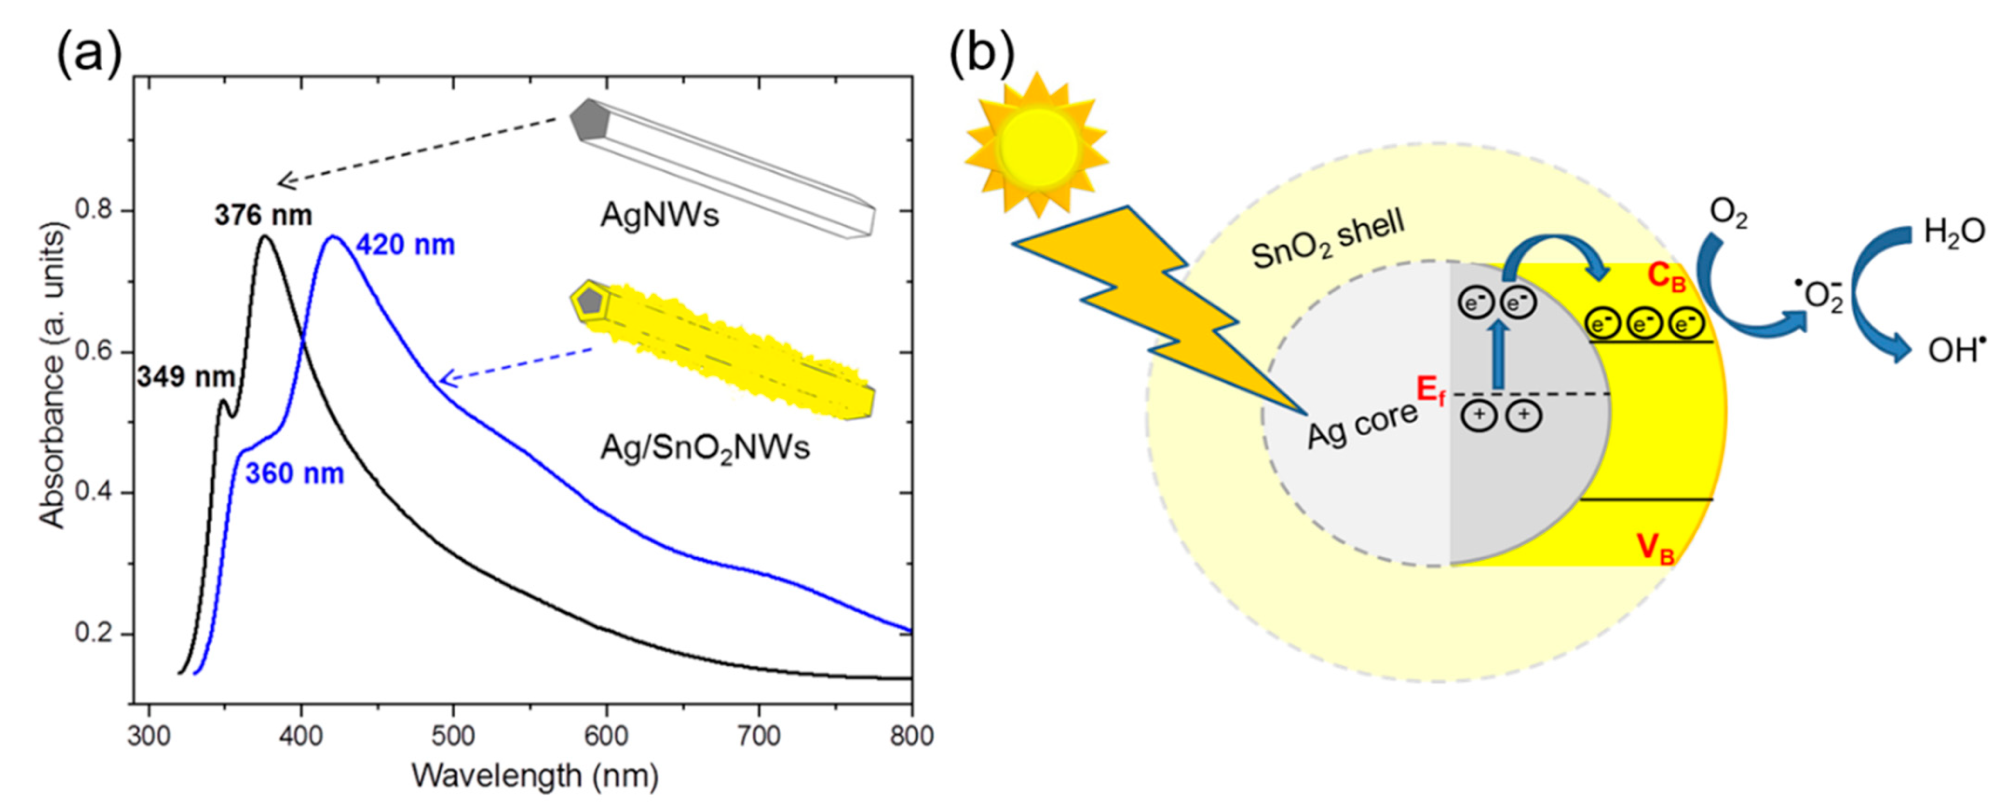 (a) The absorbance spectra of AgNWs and the core/shell Ag/SnO2NWs. (b) Schematic illustration of the photocatalytic mechanism of Ag/SnO2NWs under visible light irradiation.